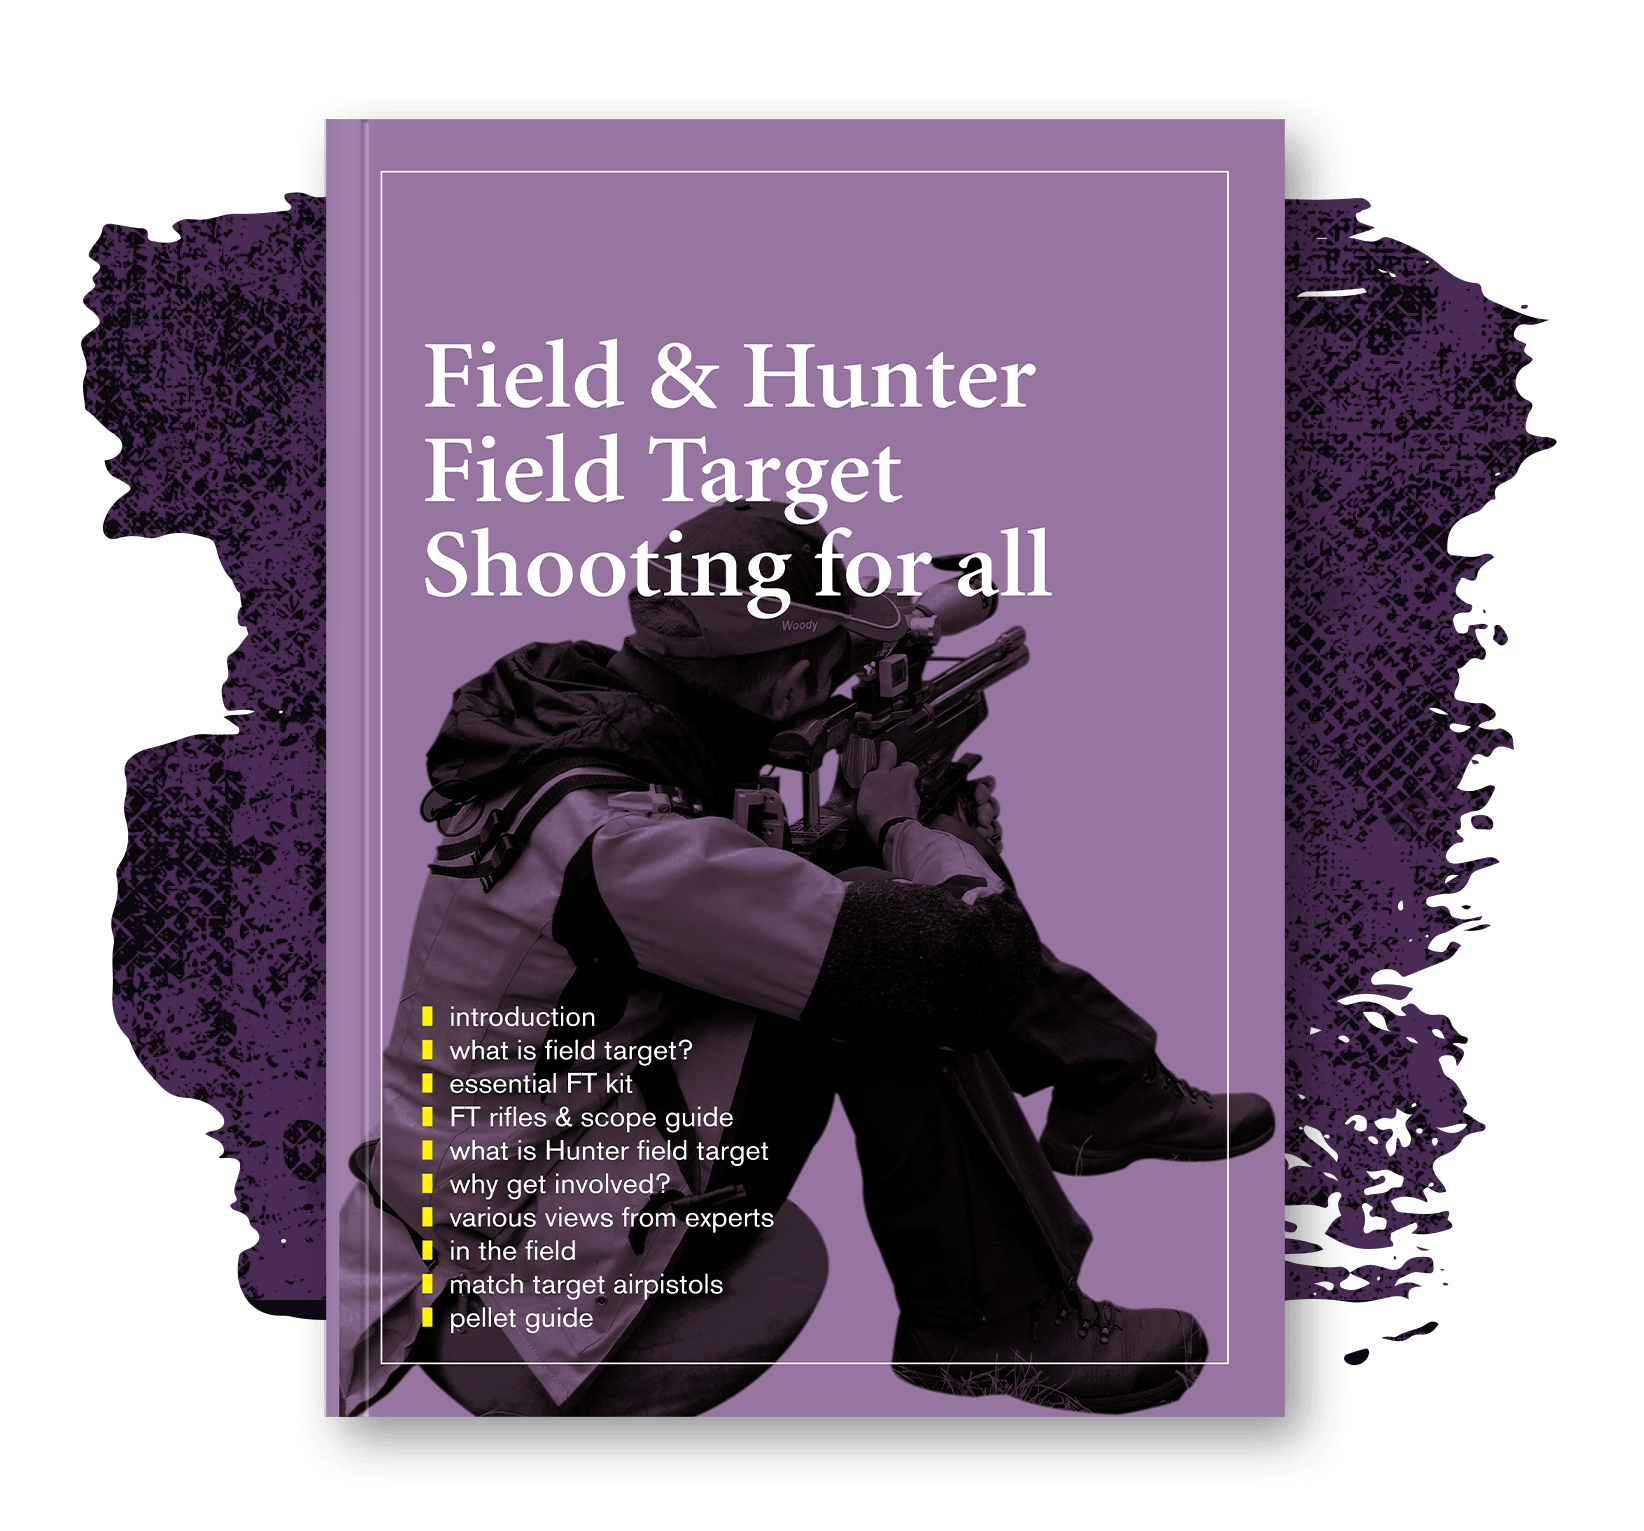 Field & Hunter Field Target Shooting For All